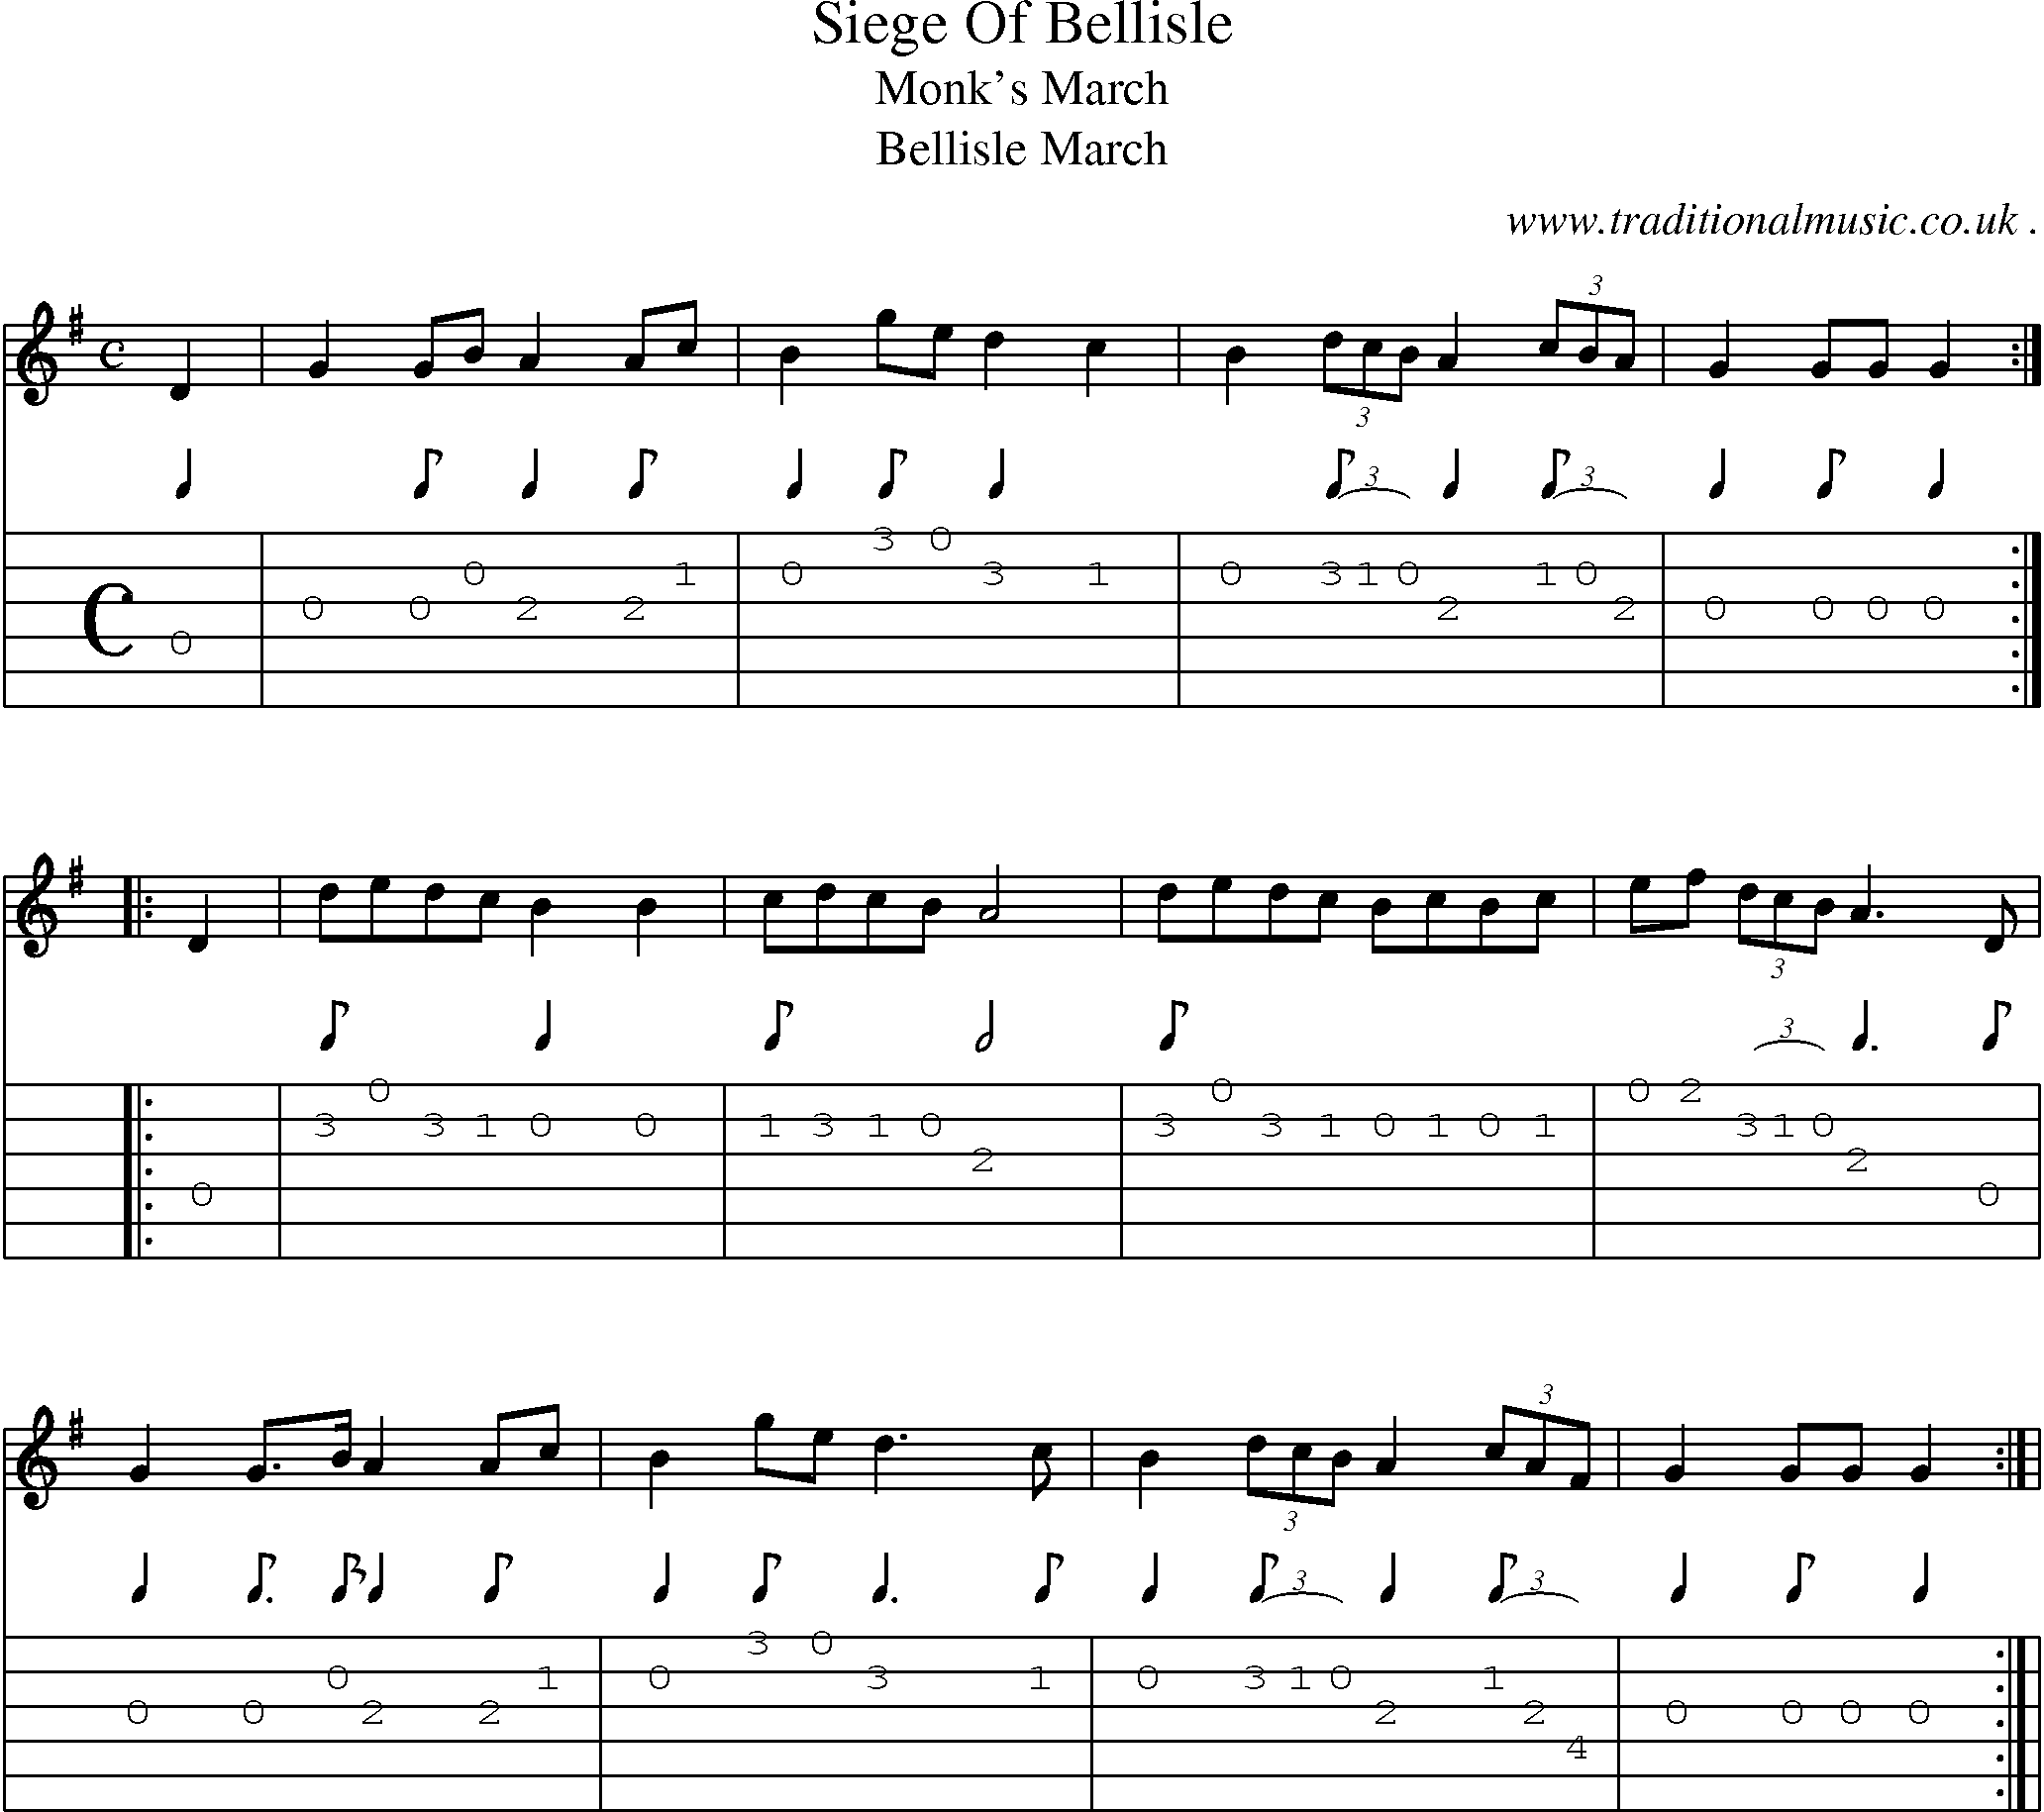 Sheet-Music and Guitar Tabs for Siege Of Bellisle